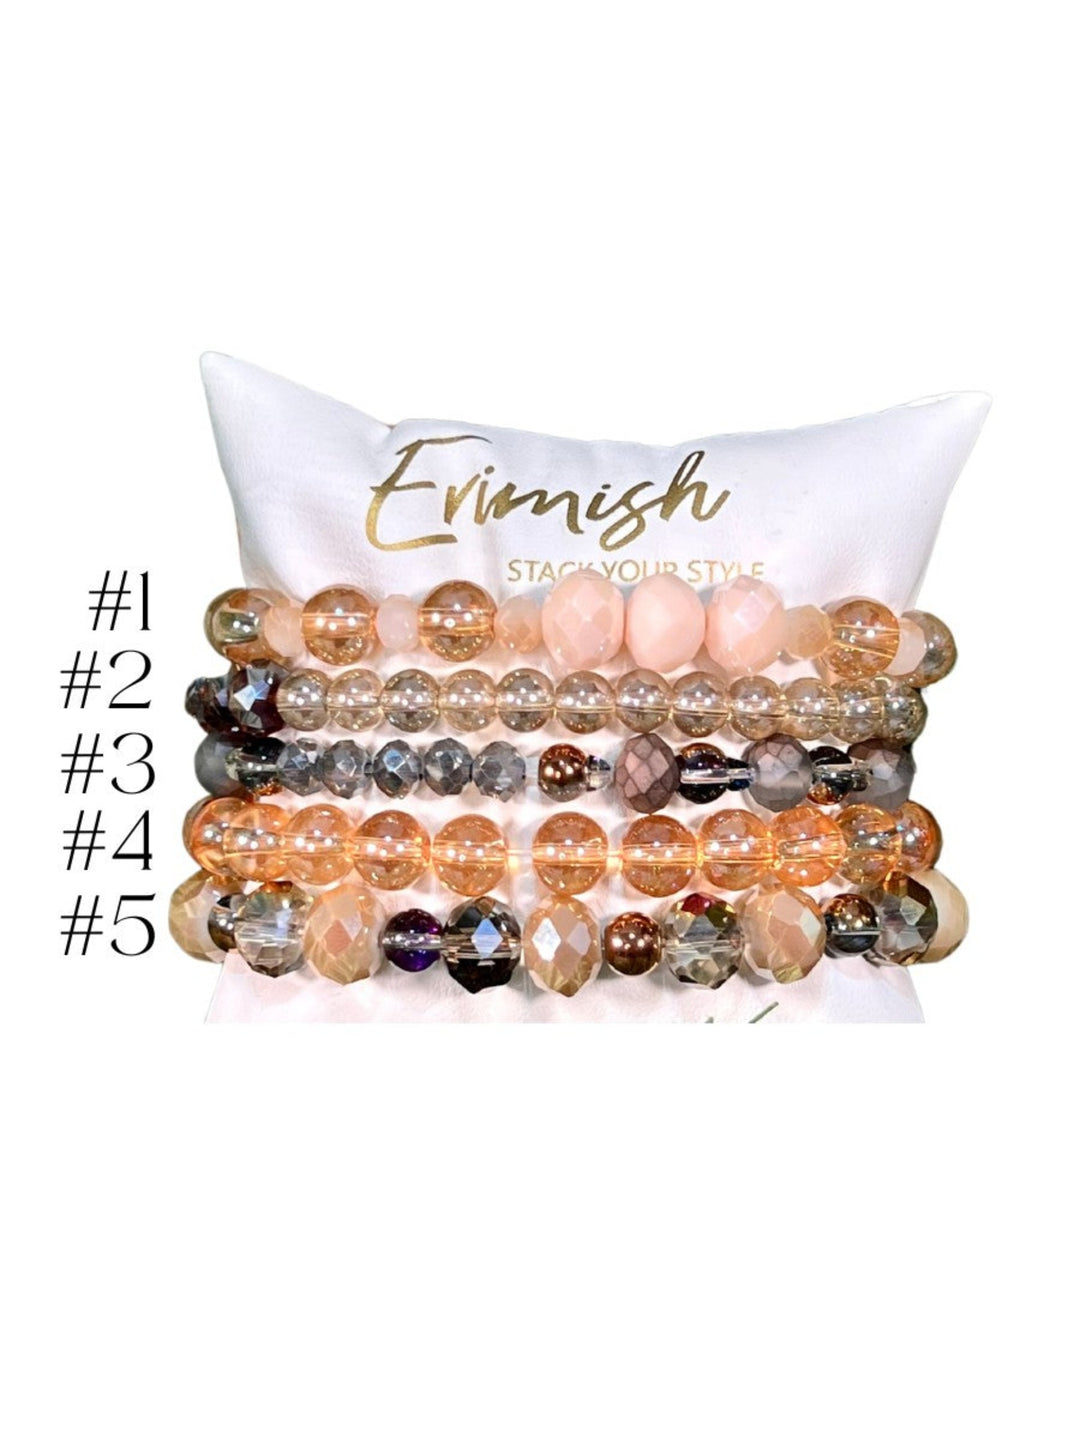 Sierra Mix and Match Bracelet Collection